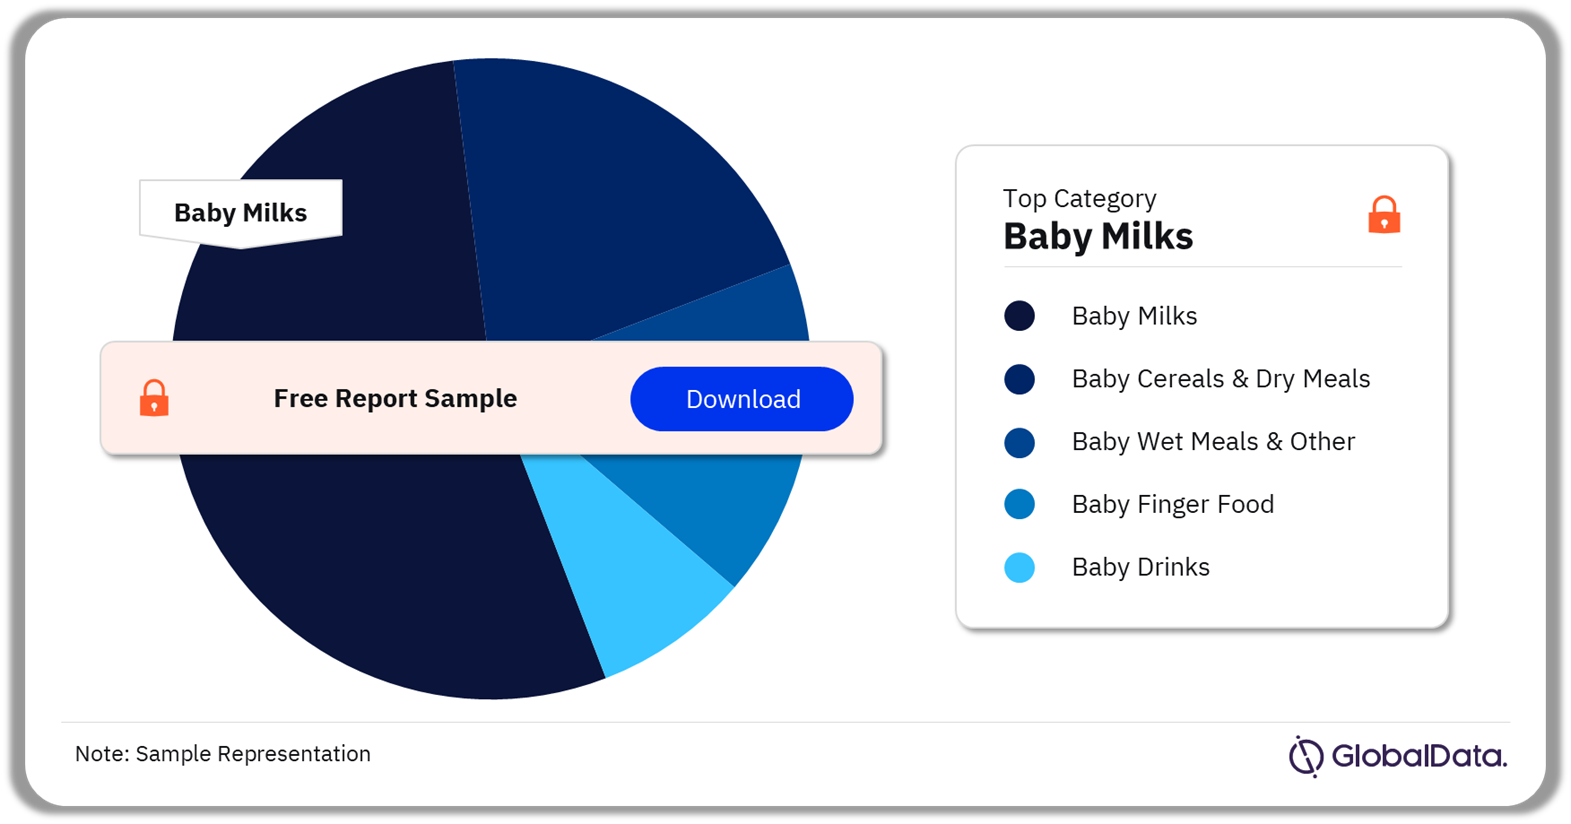 Baby milk led the market with the highest baby food market share in 2022